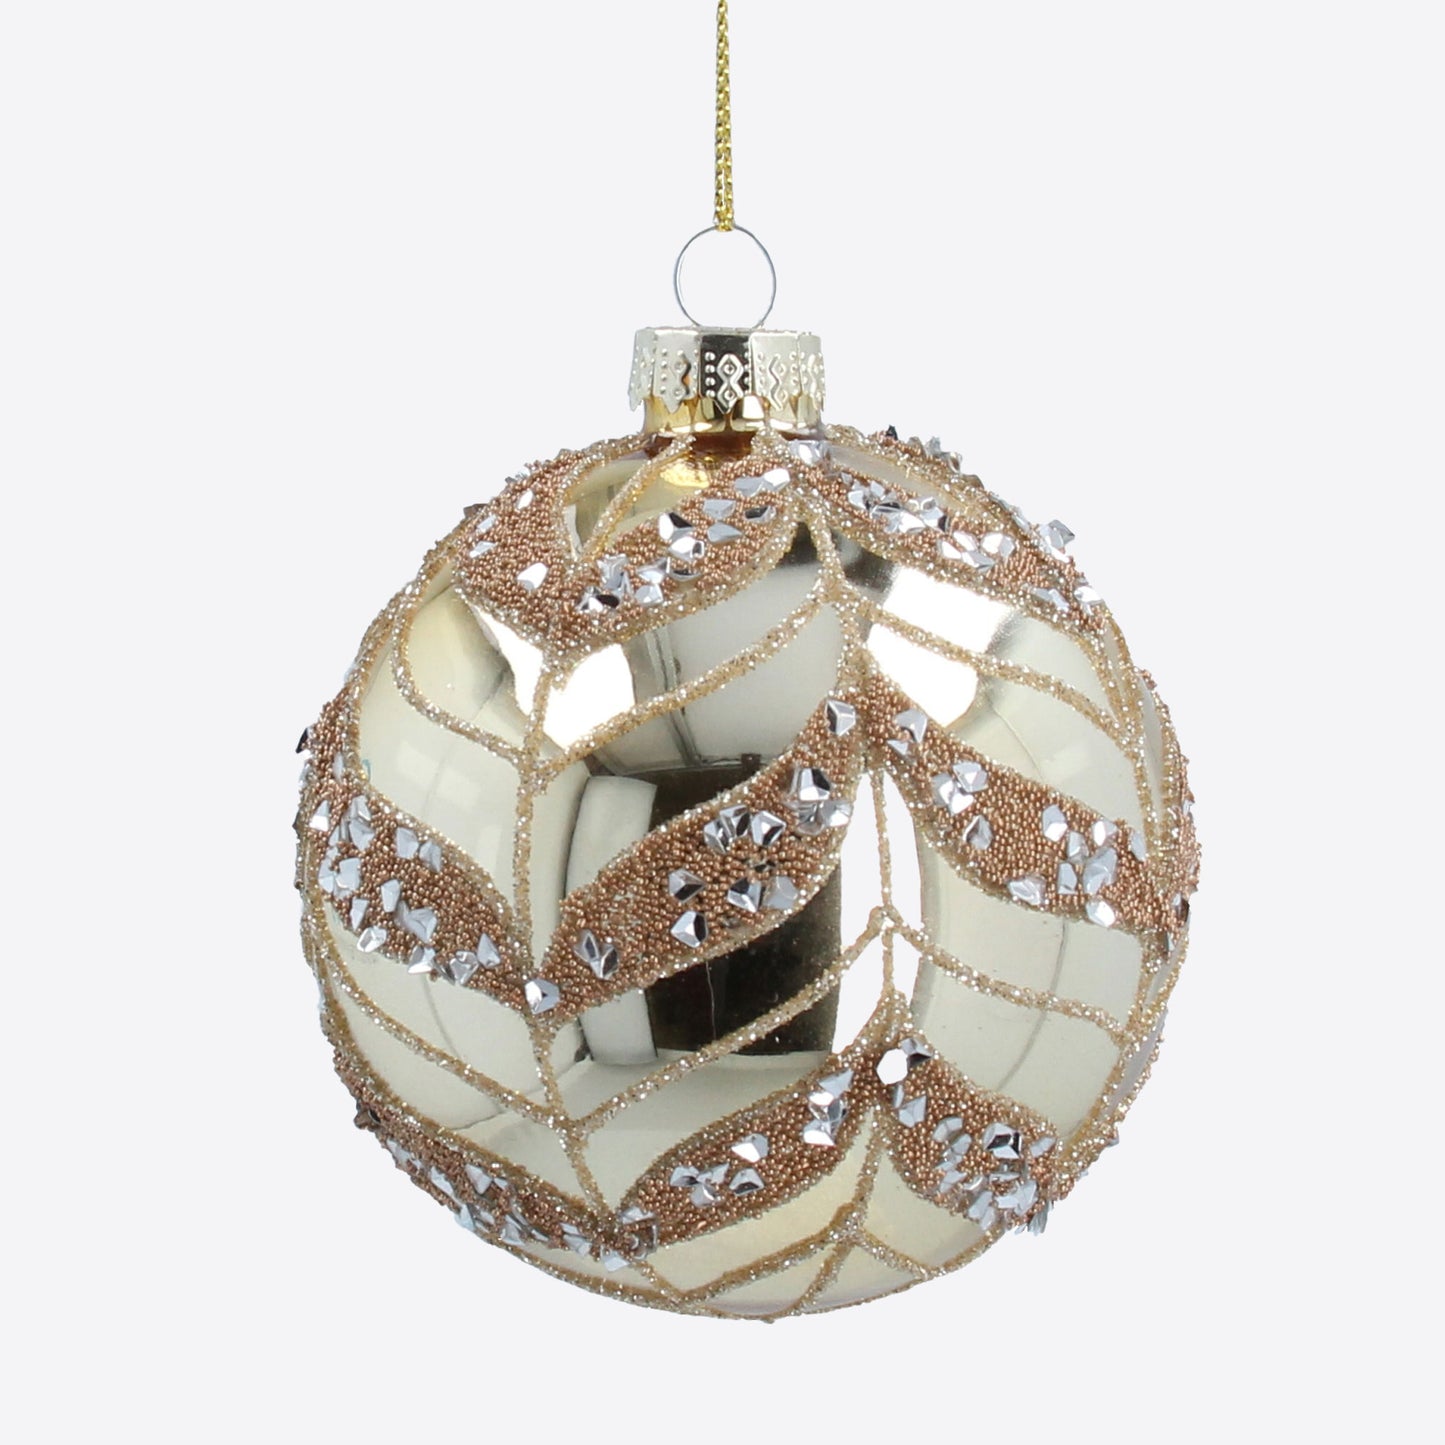 Shiny Gold Bauble with Copper Bead Swags Not specified